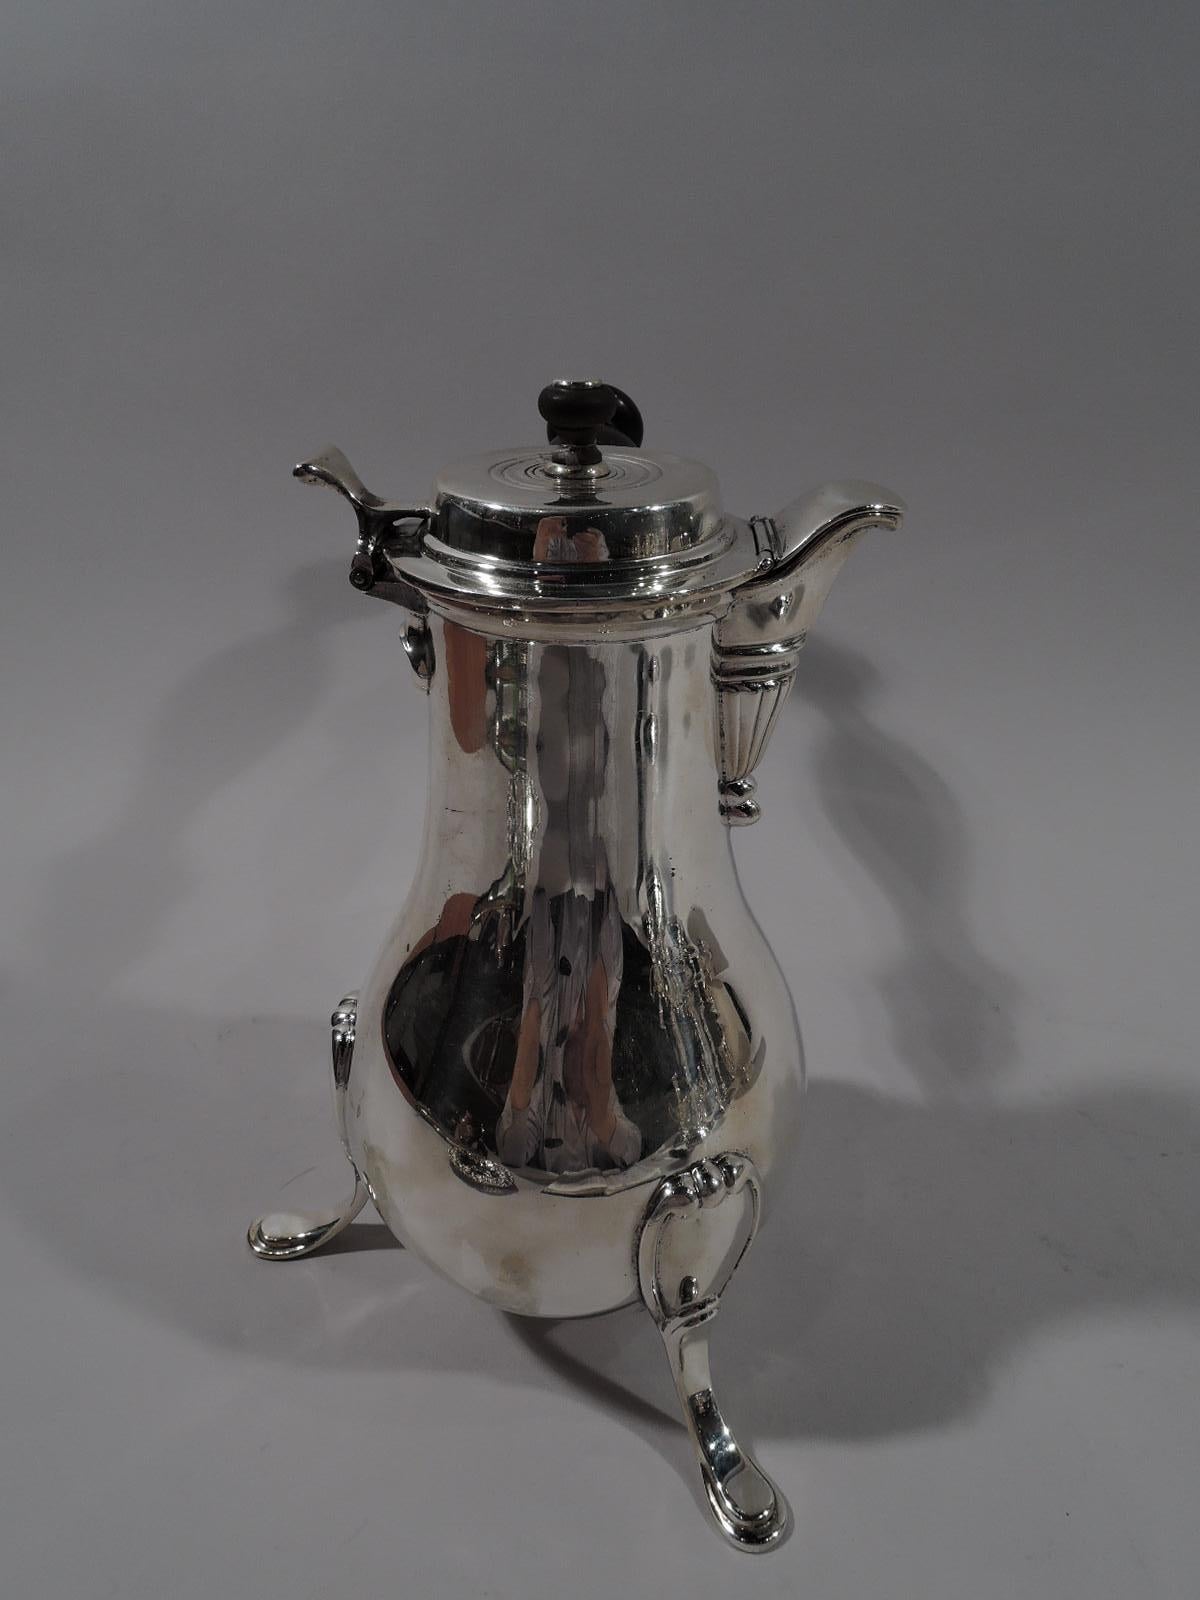 Georgian sterling silver chocolate pot. Made by Howard & Co. in New York in 1903. Baluster body on 3 scroll-mounted hoof supports. Turned and stained-wood handle. Cover hinged and raised with thumb-rest and hinged spout CAP. Spout V-Form and fluted.